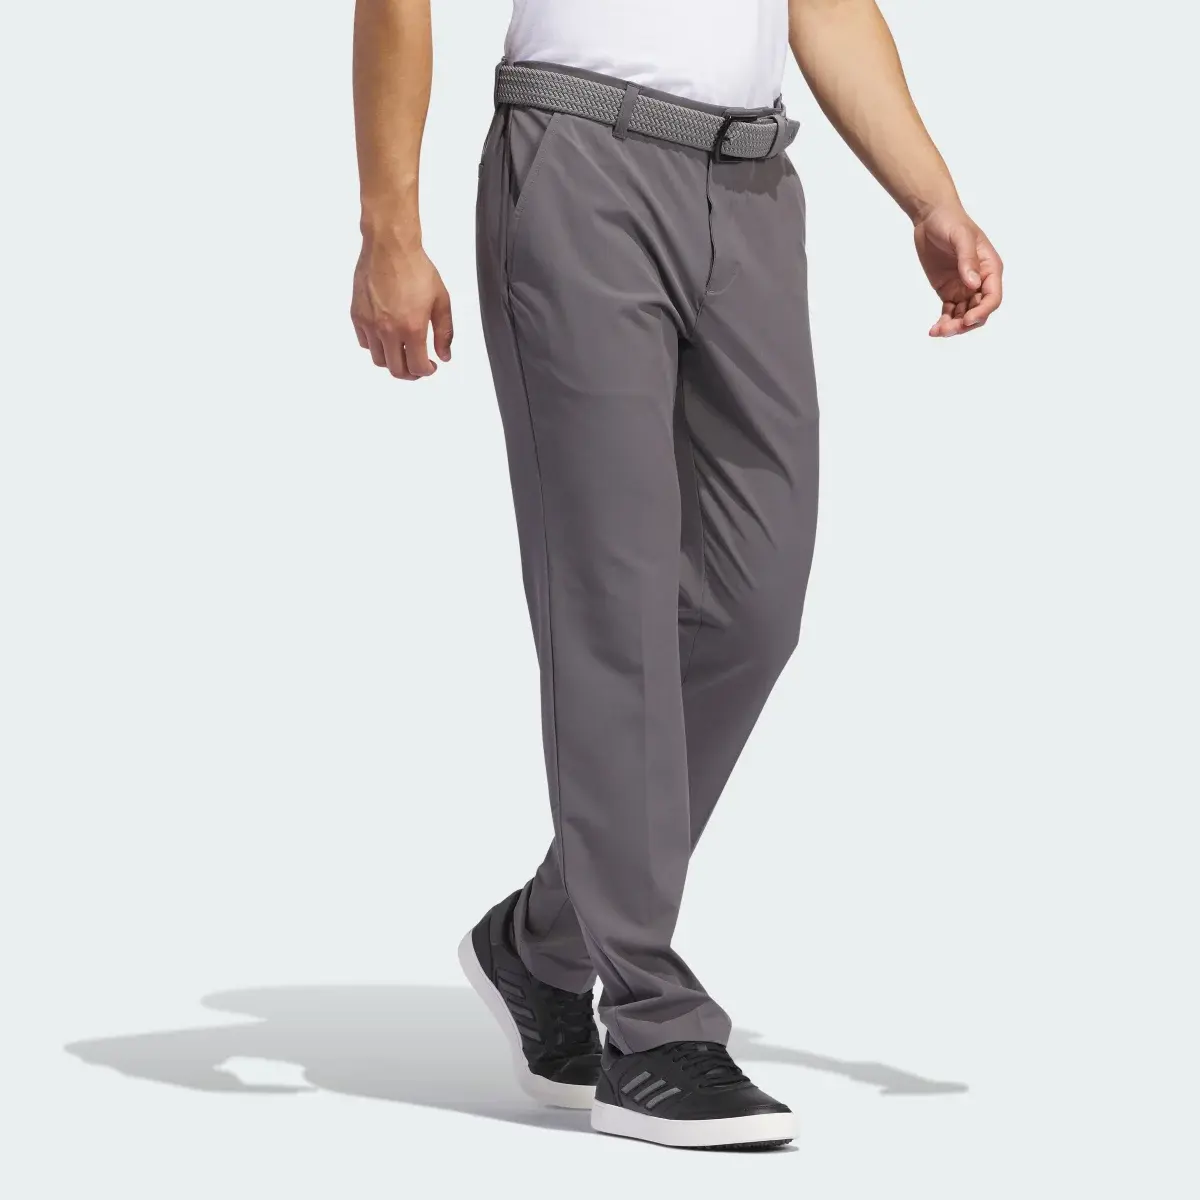 Adidas Ultimate365 Tapered Golf Trousers. 3